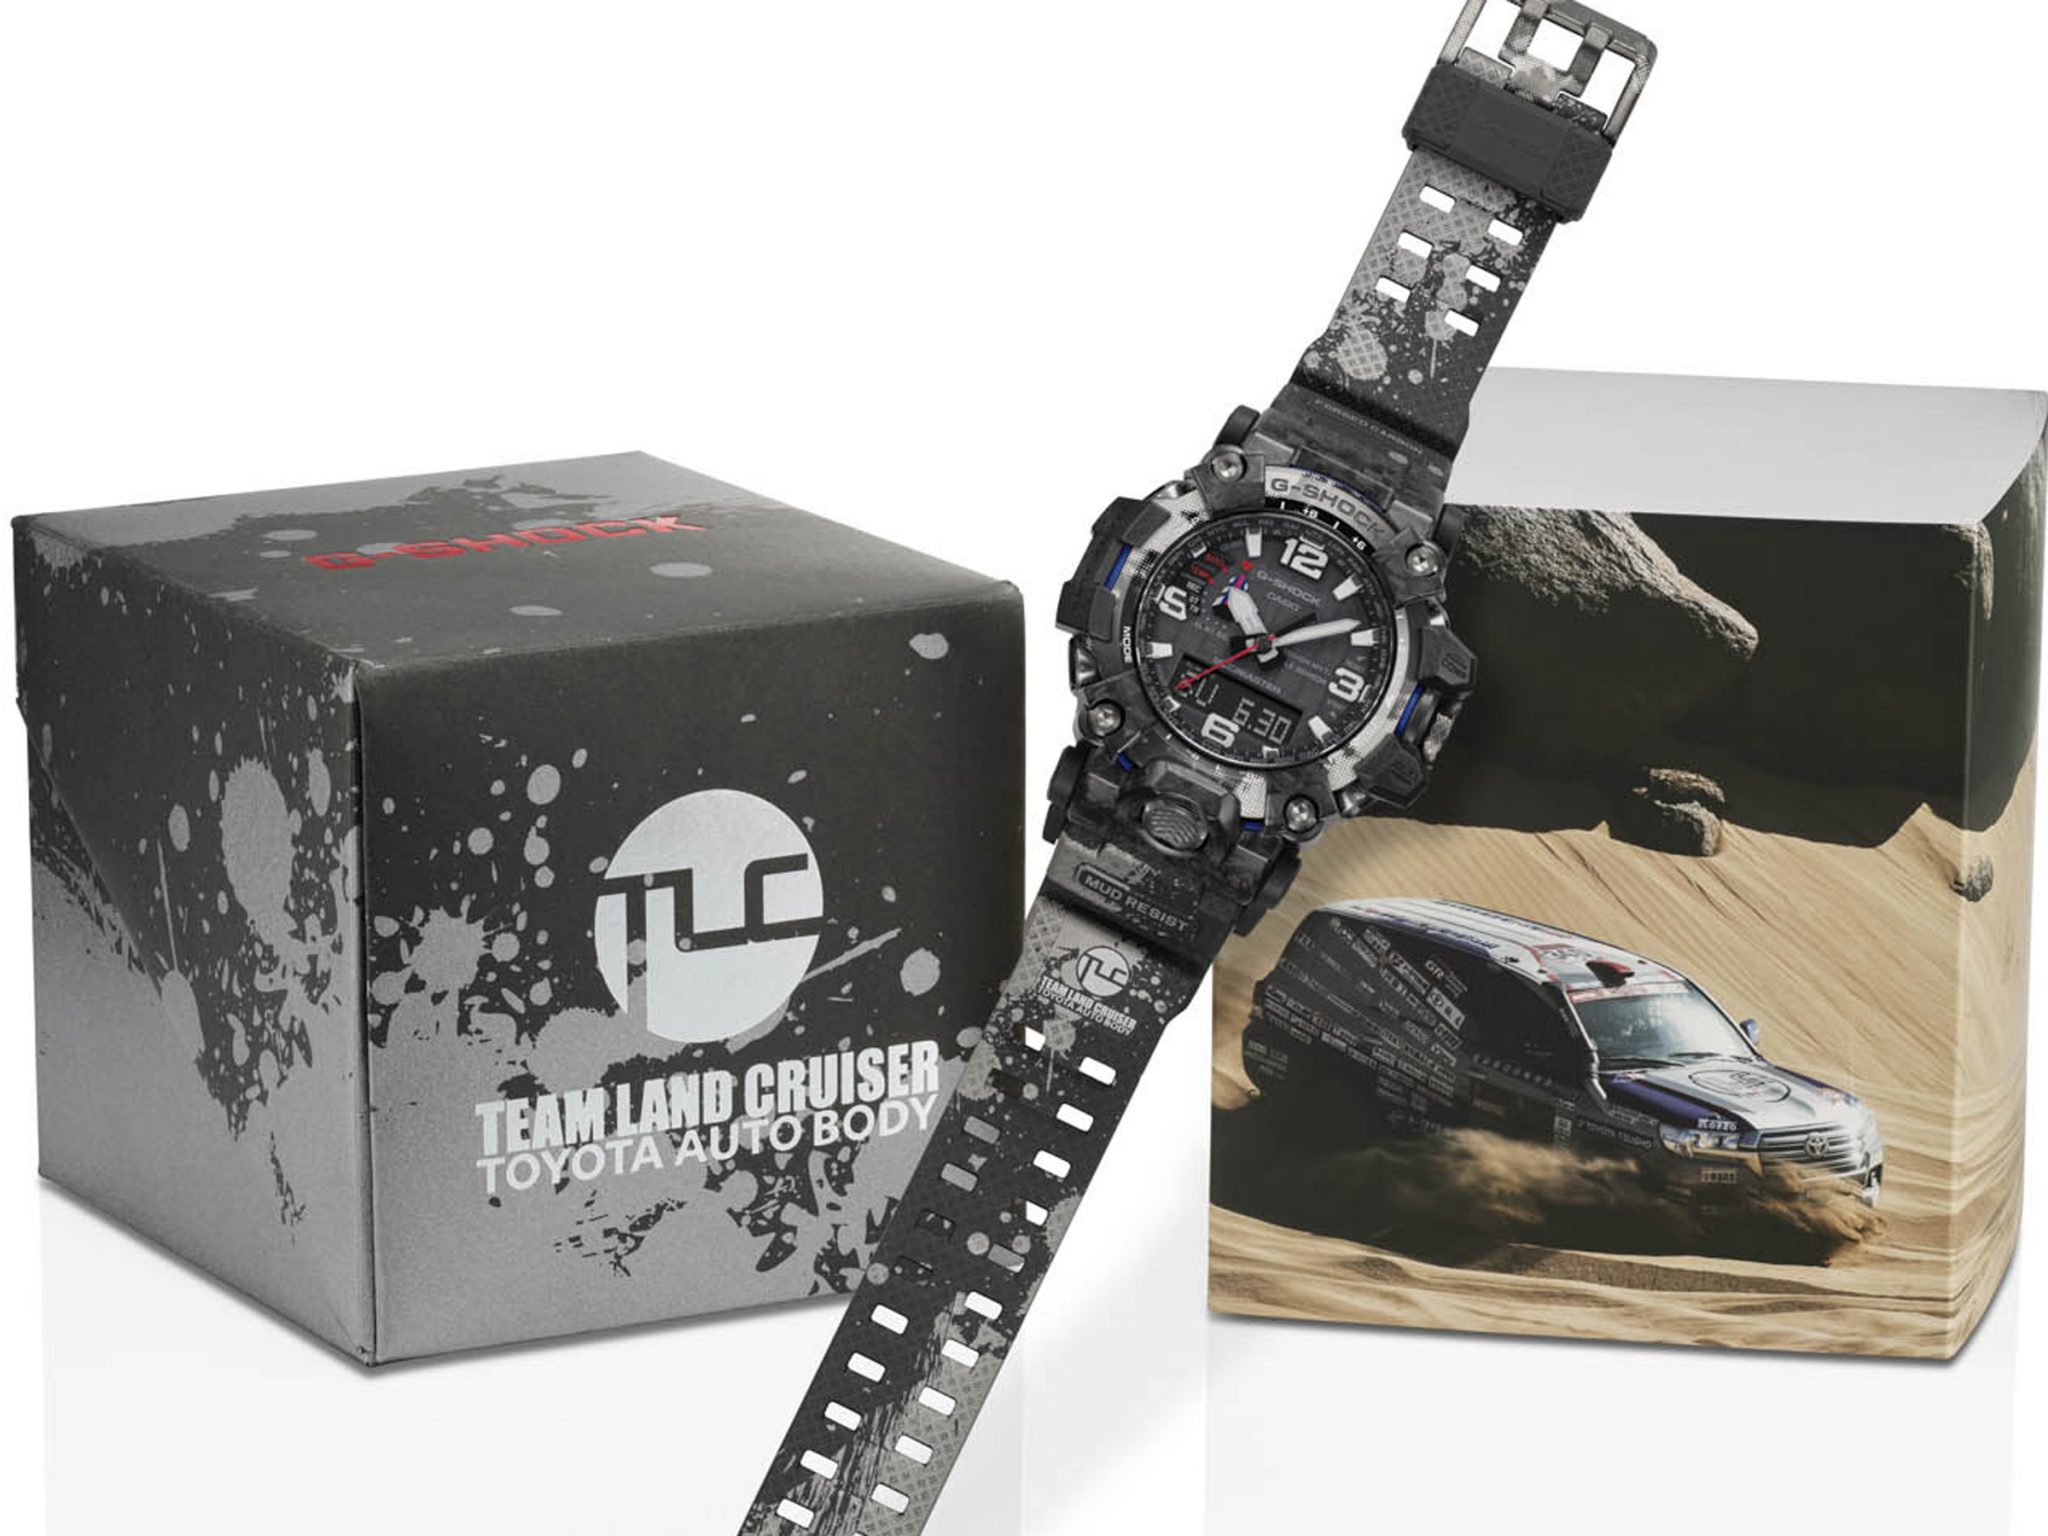 Toyota TRD Solar Octane watches Photo Gallery